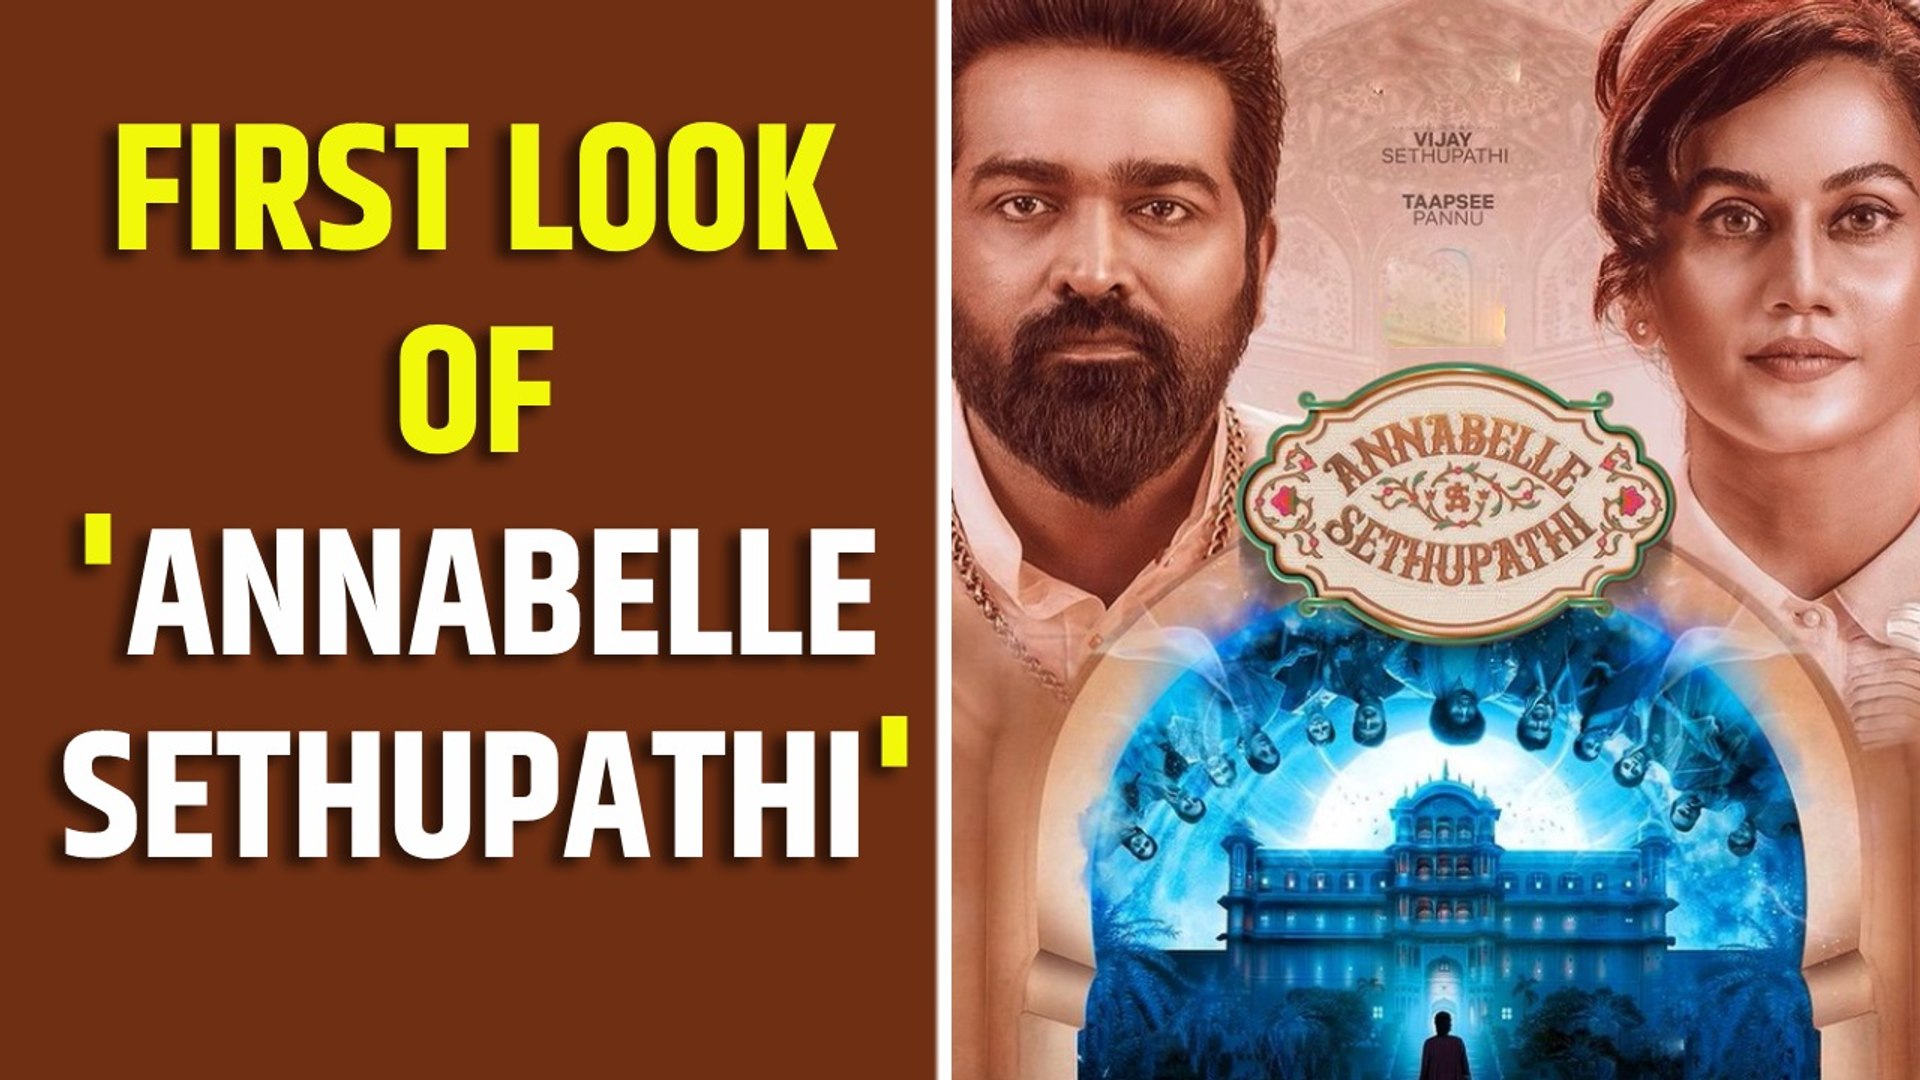 Date release annabelle sethupathi Watch Annabelle